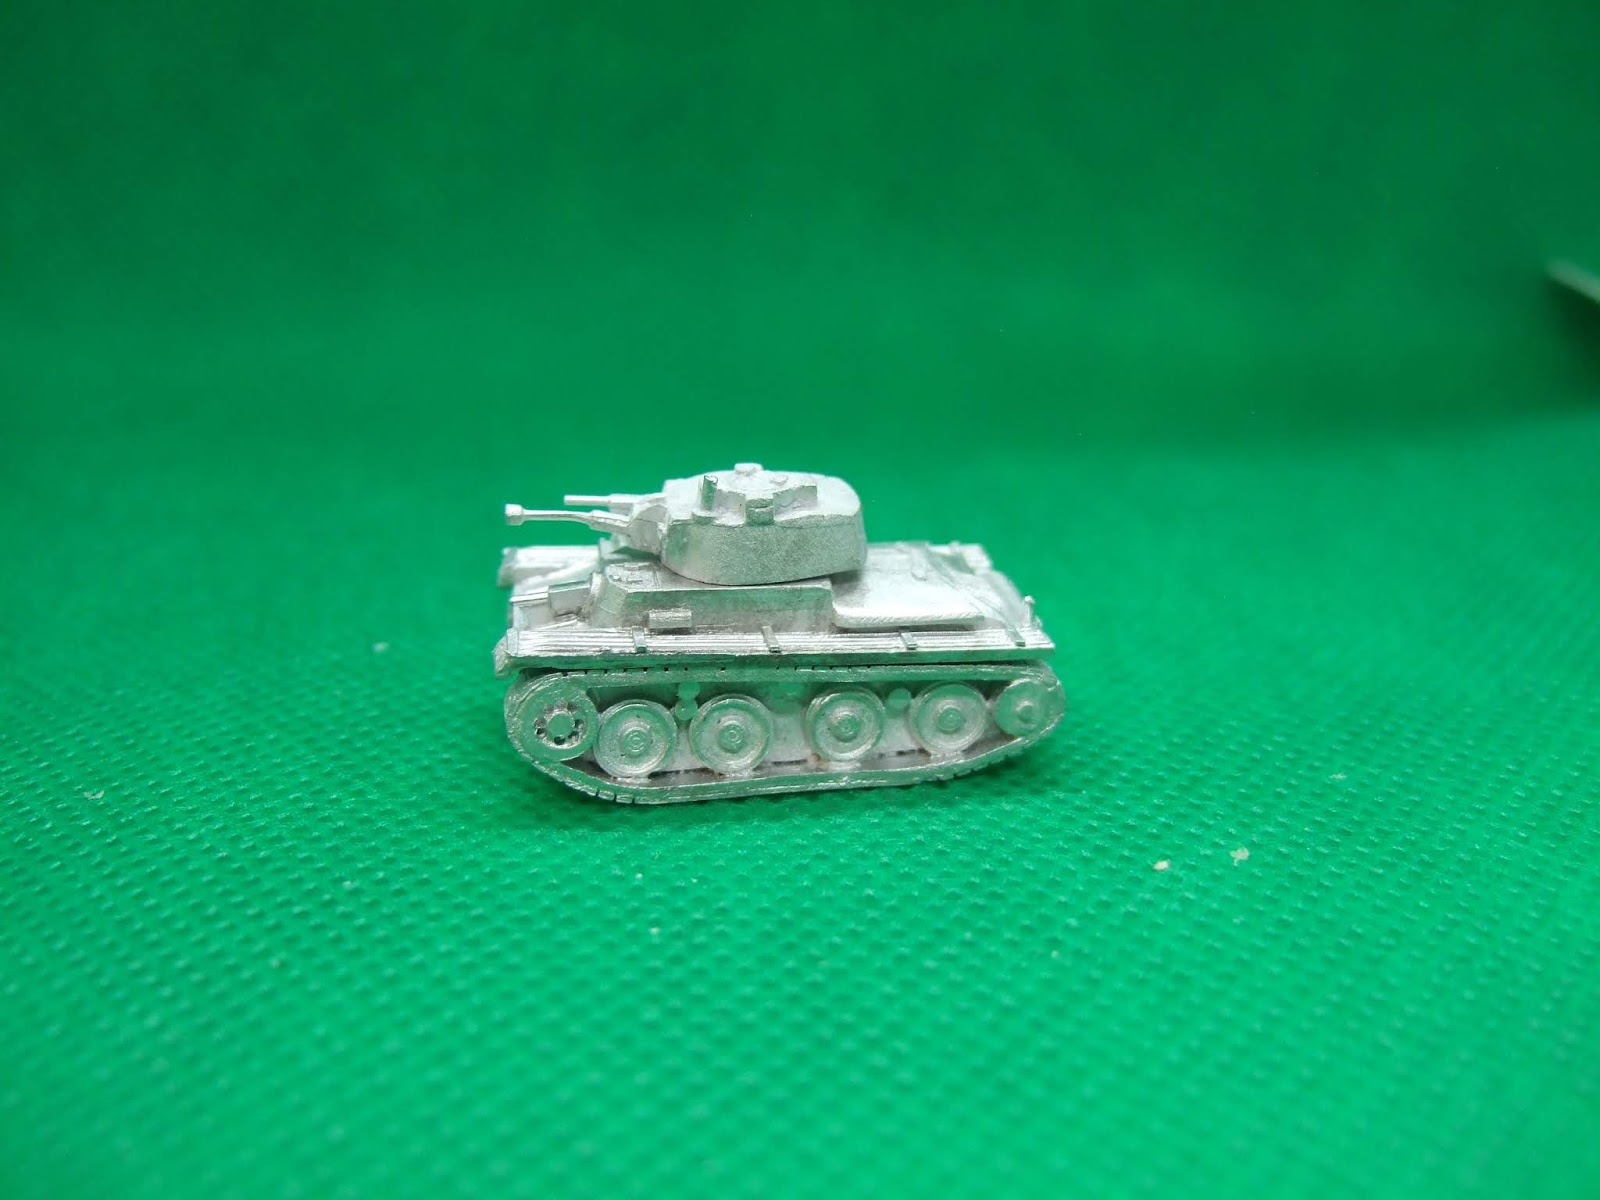 10mm Wargaming: New 10mm Panzer 38(t) Ausf C from Lancer Miniatures